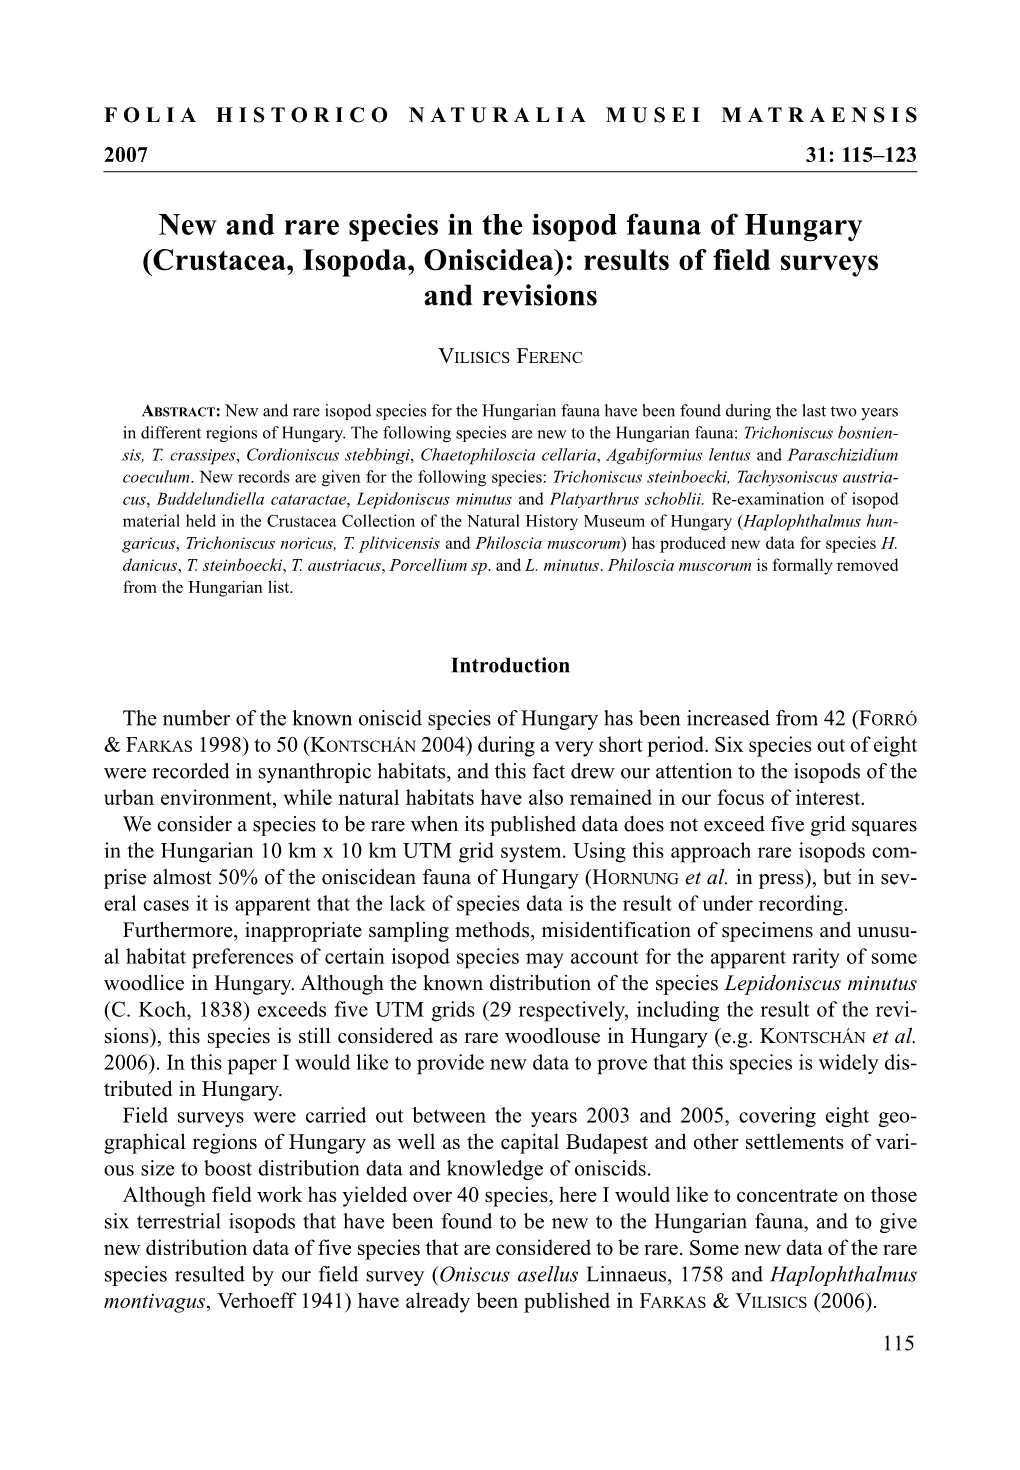 New and Rare Species in the Isopod Fauna of Hungary (Crustacea, Isopoda, Oniscidea): Results of Field Surveys and Revisions